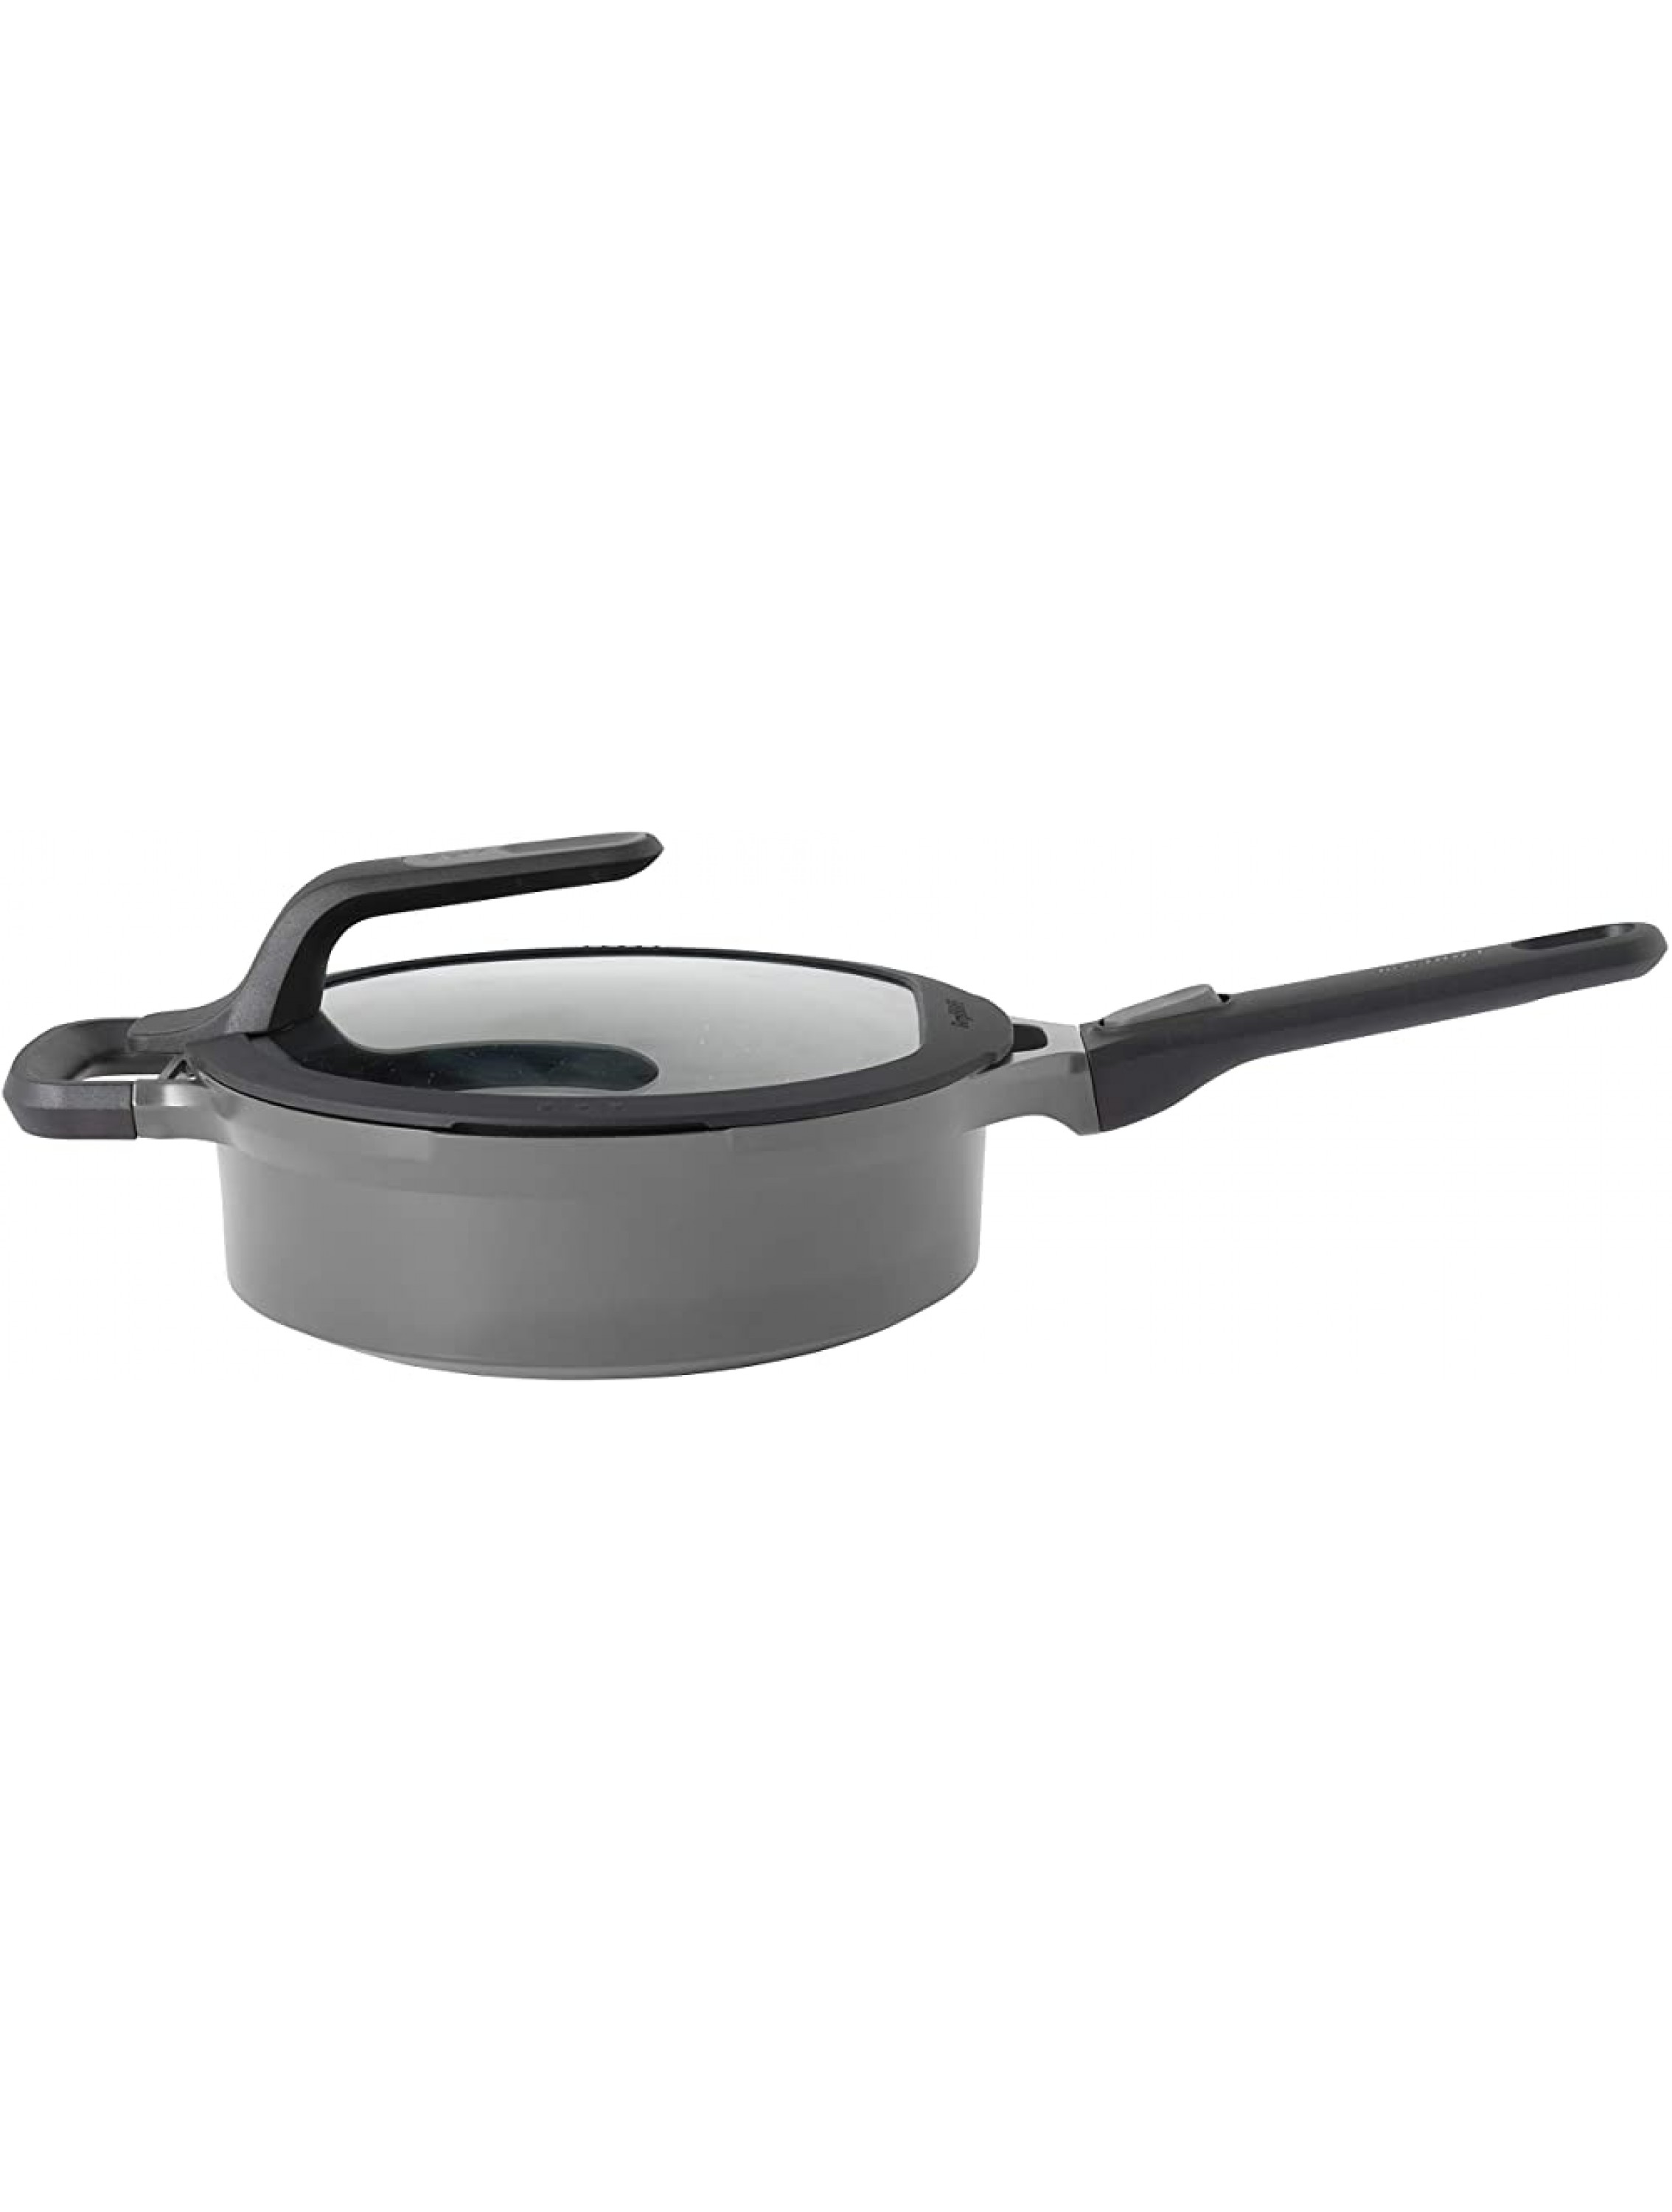 BergHOFF GEM Non-stick Cast Aluminum Sauté Pan 10 3.5 qt. Stay-cool Detachable Handle Dripless-Pouring Glass Lid Ferno-Green PFOA Free Coating Induction Cooktop Oven Safe - BTOH0YAJ2